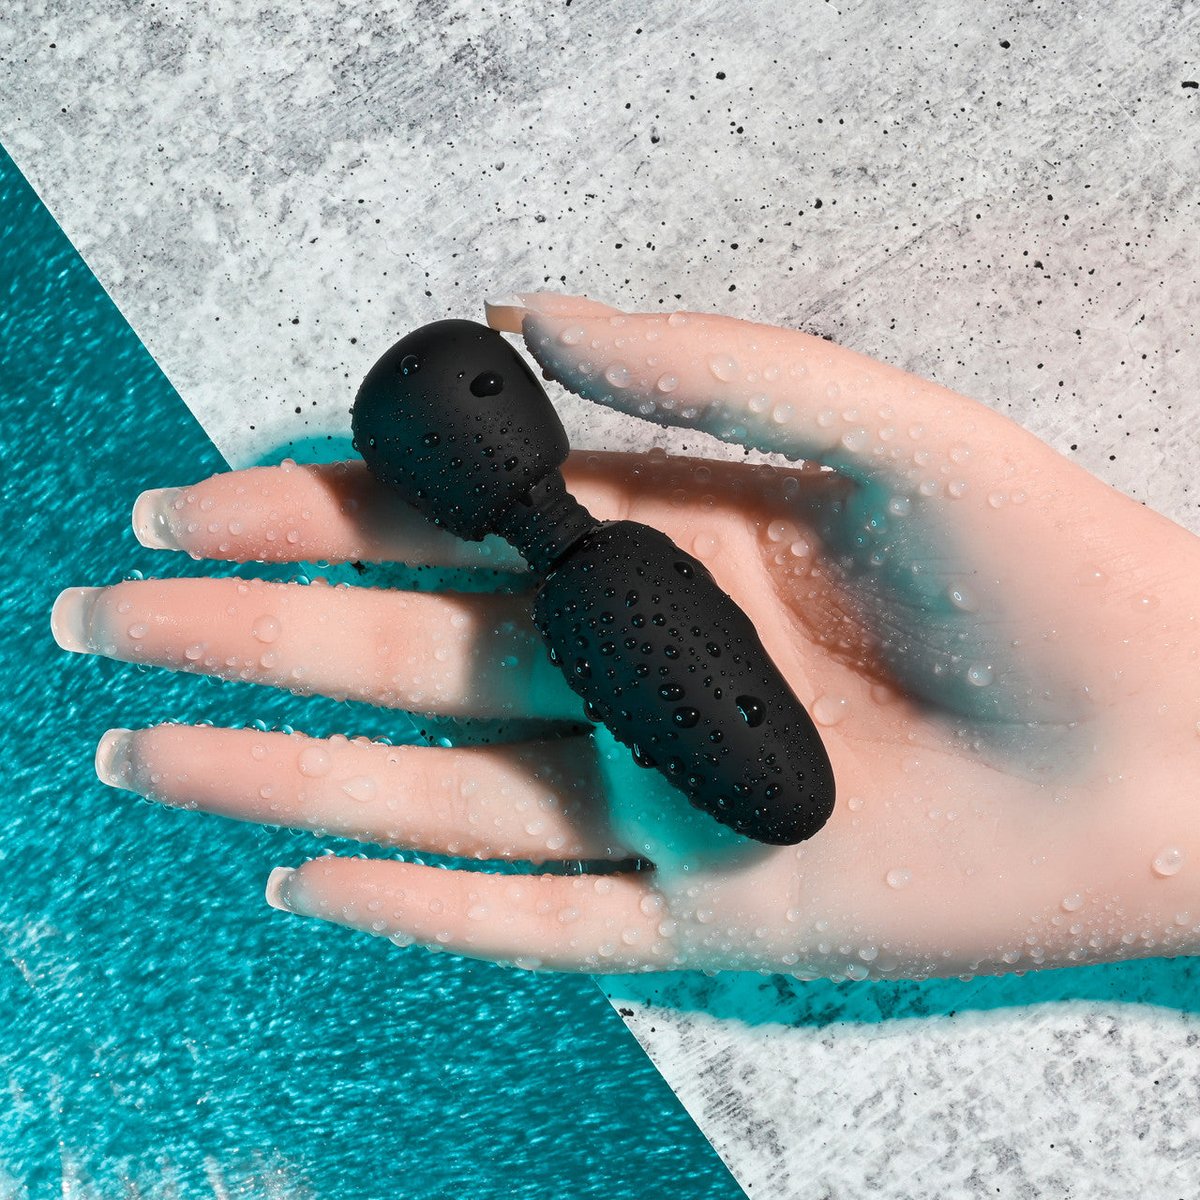 Petite and powerful, this playful mini-wand features a flexible round head for targeted vibration and a textured handle for a sturdy grip. pc: @evolved_novelties . . #petiteandpowerful #selopatoys #buzzoneout #mvsturbationmay #compact #vibrating #nowavailable #loversplayground